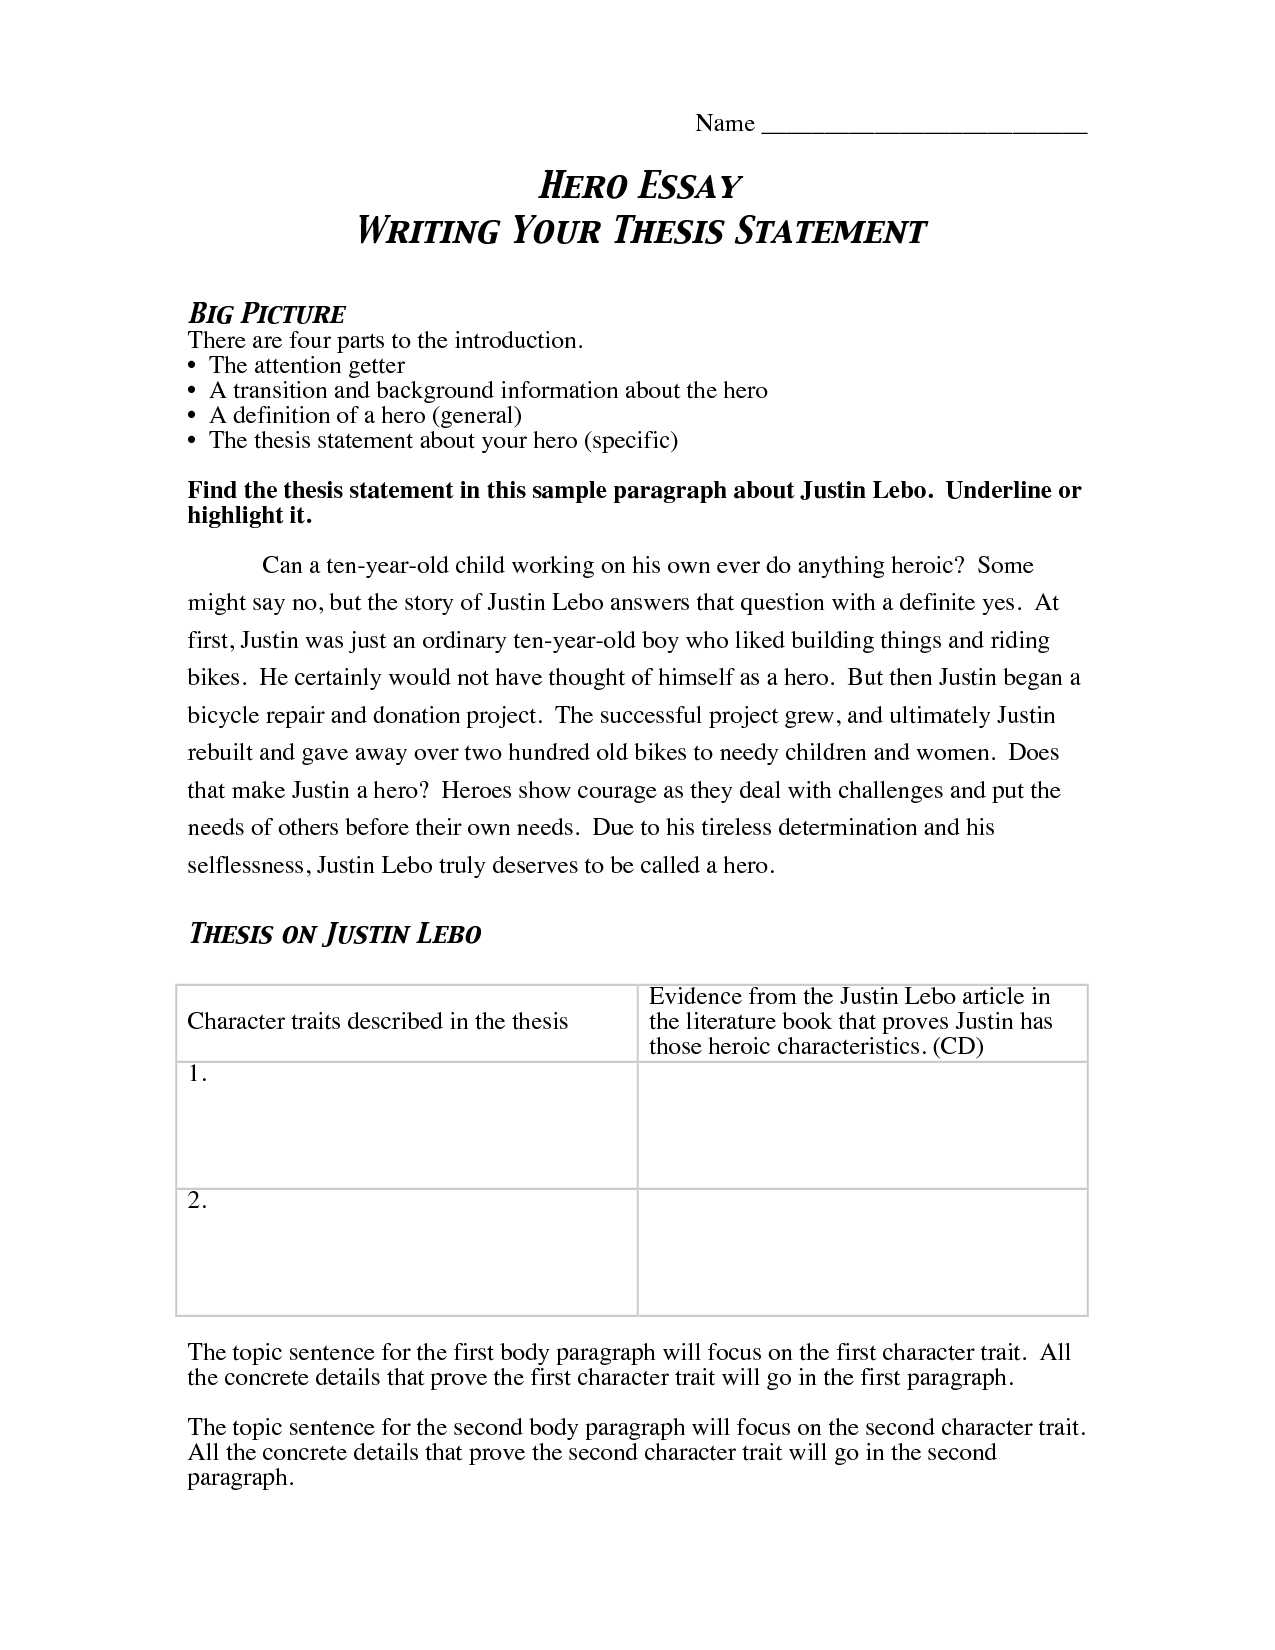 Pollution Vocabulary Worksheet as Well as Essay First Sentence Opening Sentence Of An Essay Good Opening